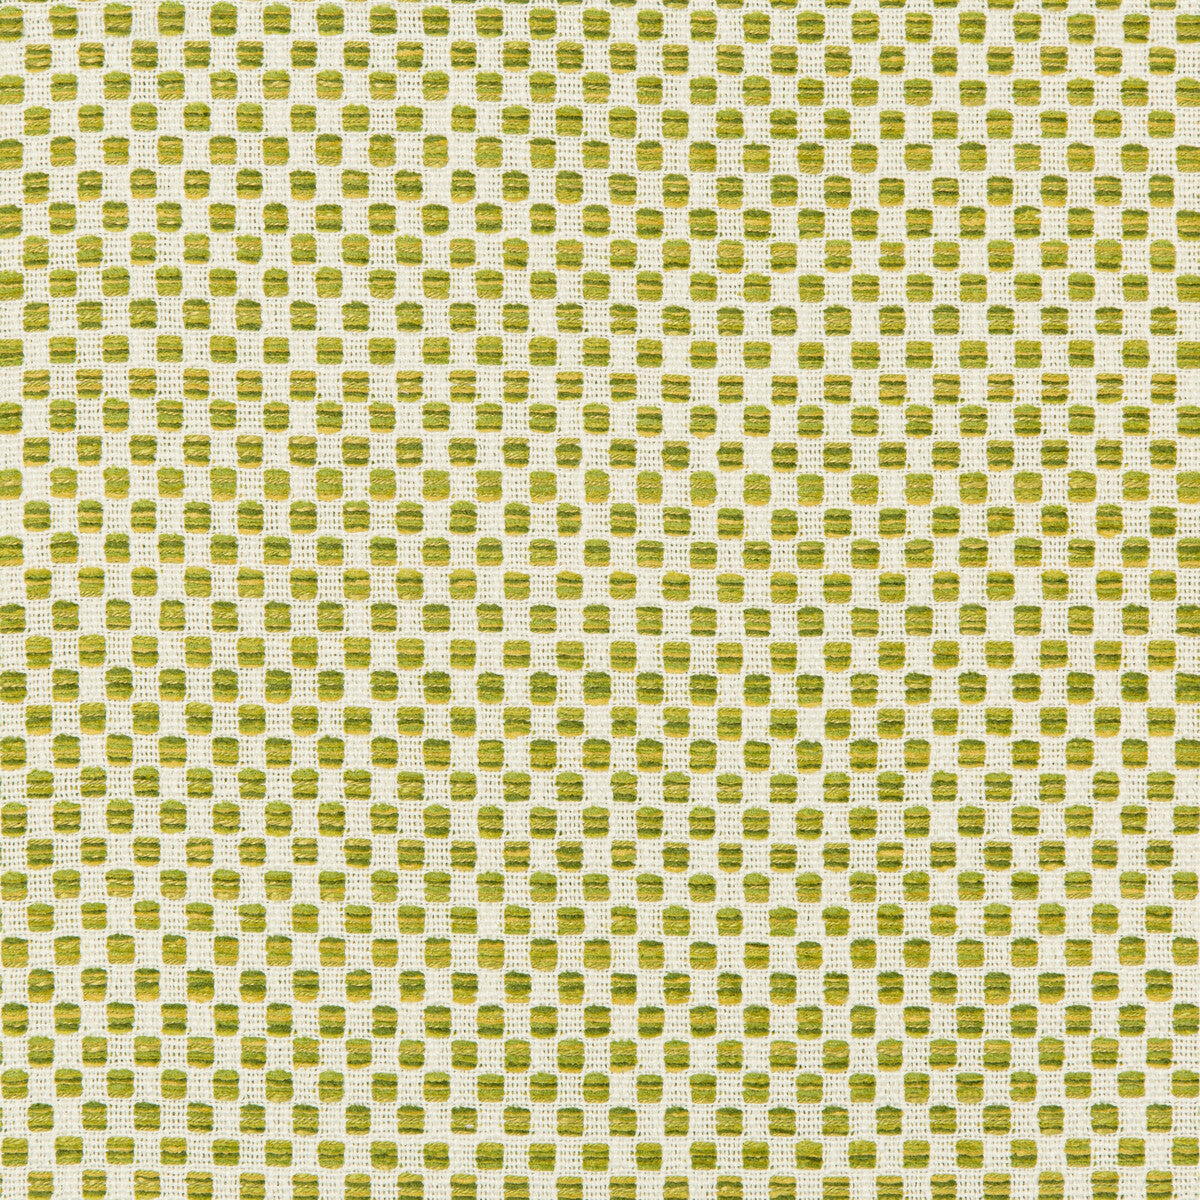 Kravet Design fabric in 36090-340 color - pattern 36090.340.0 - by Kravet Design in the Inside Out Performance Fabrics collection